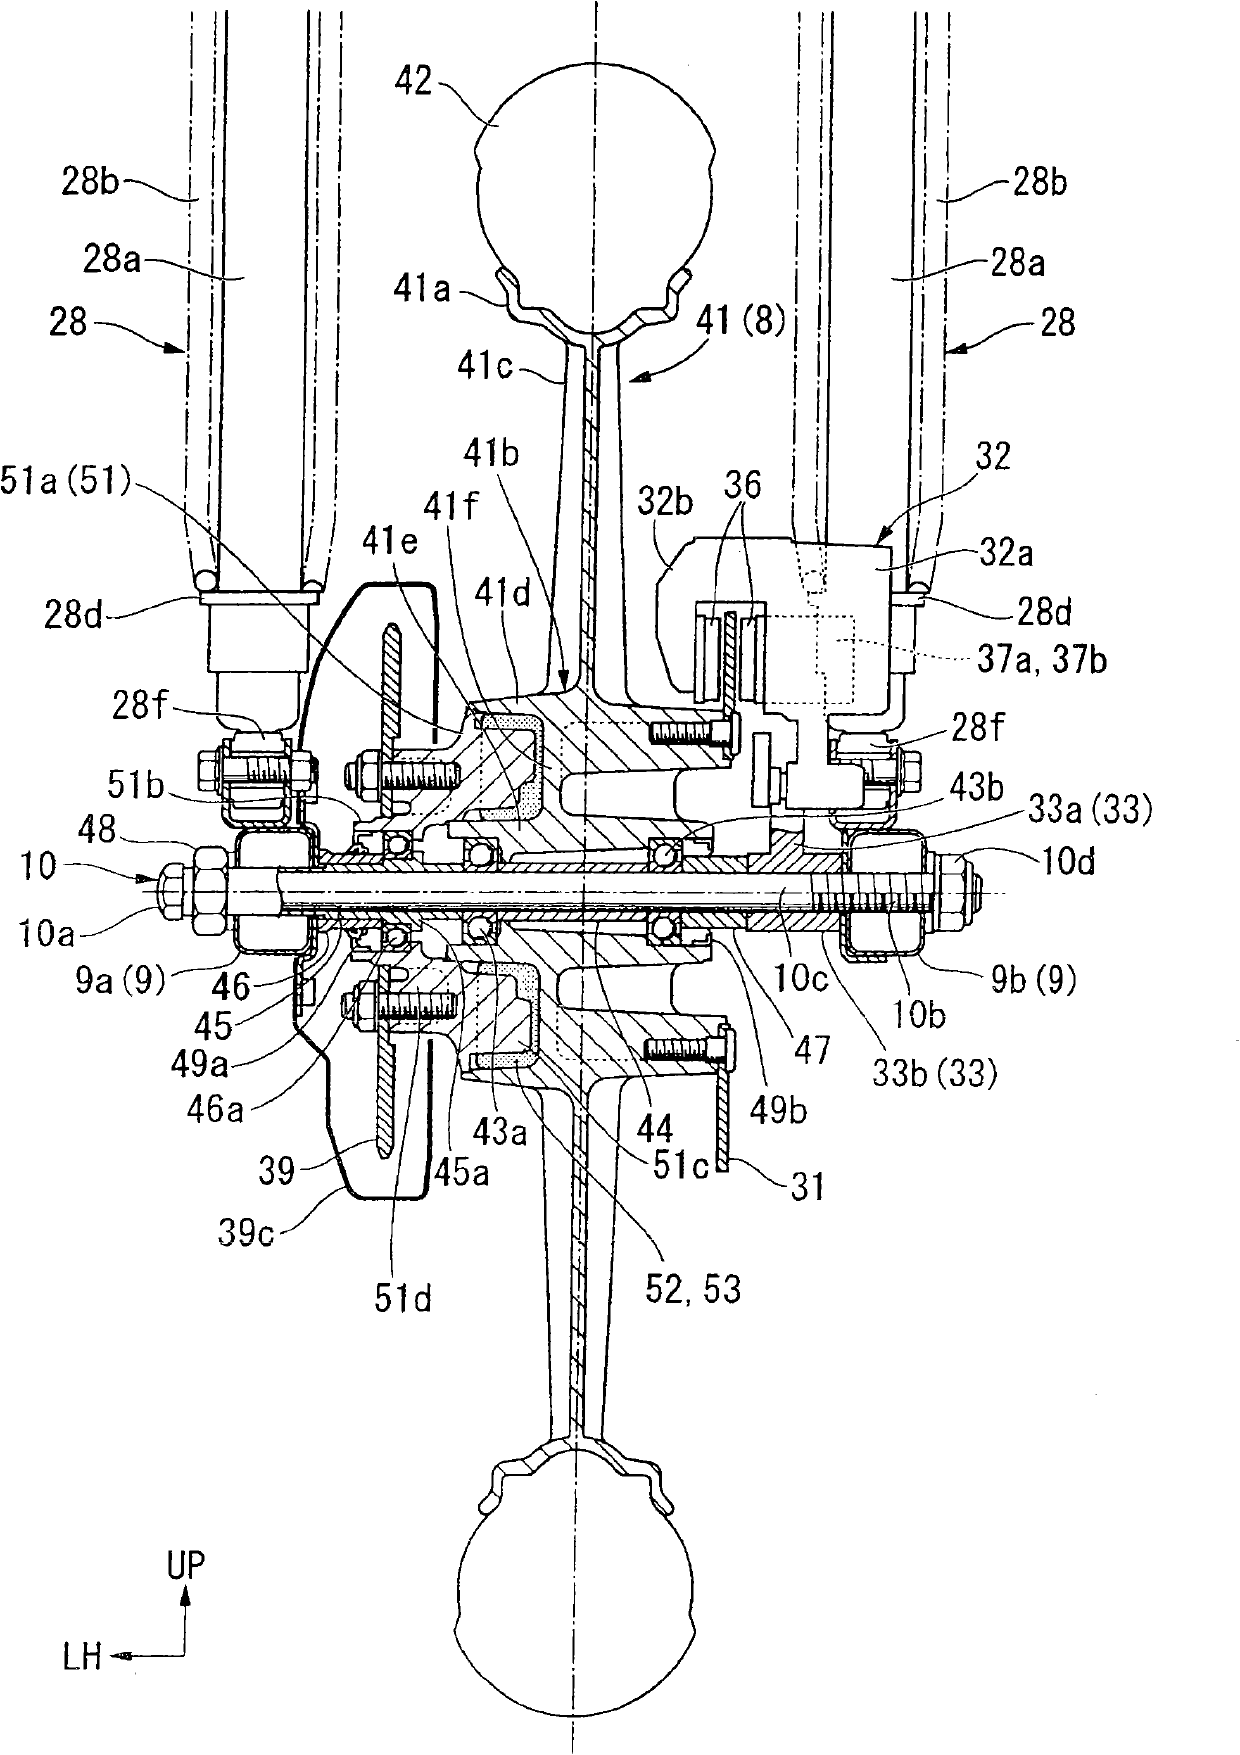 Structure and method of assembling and disassembling a rear wheel of a motor bicycle